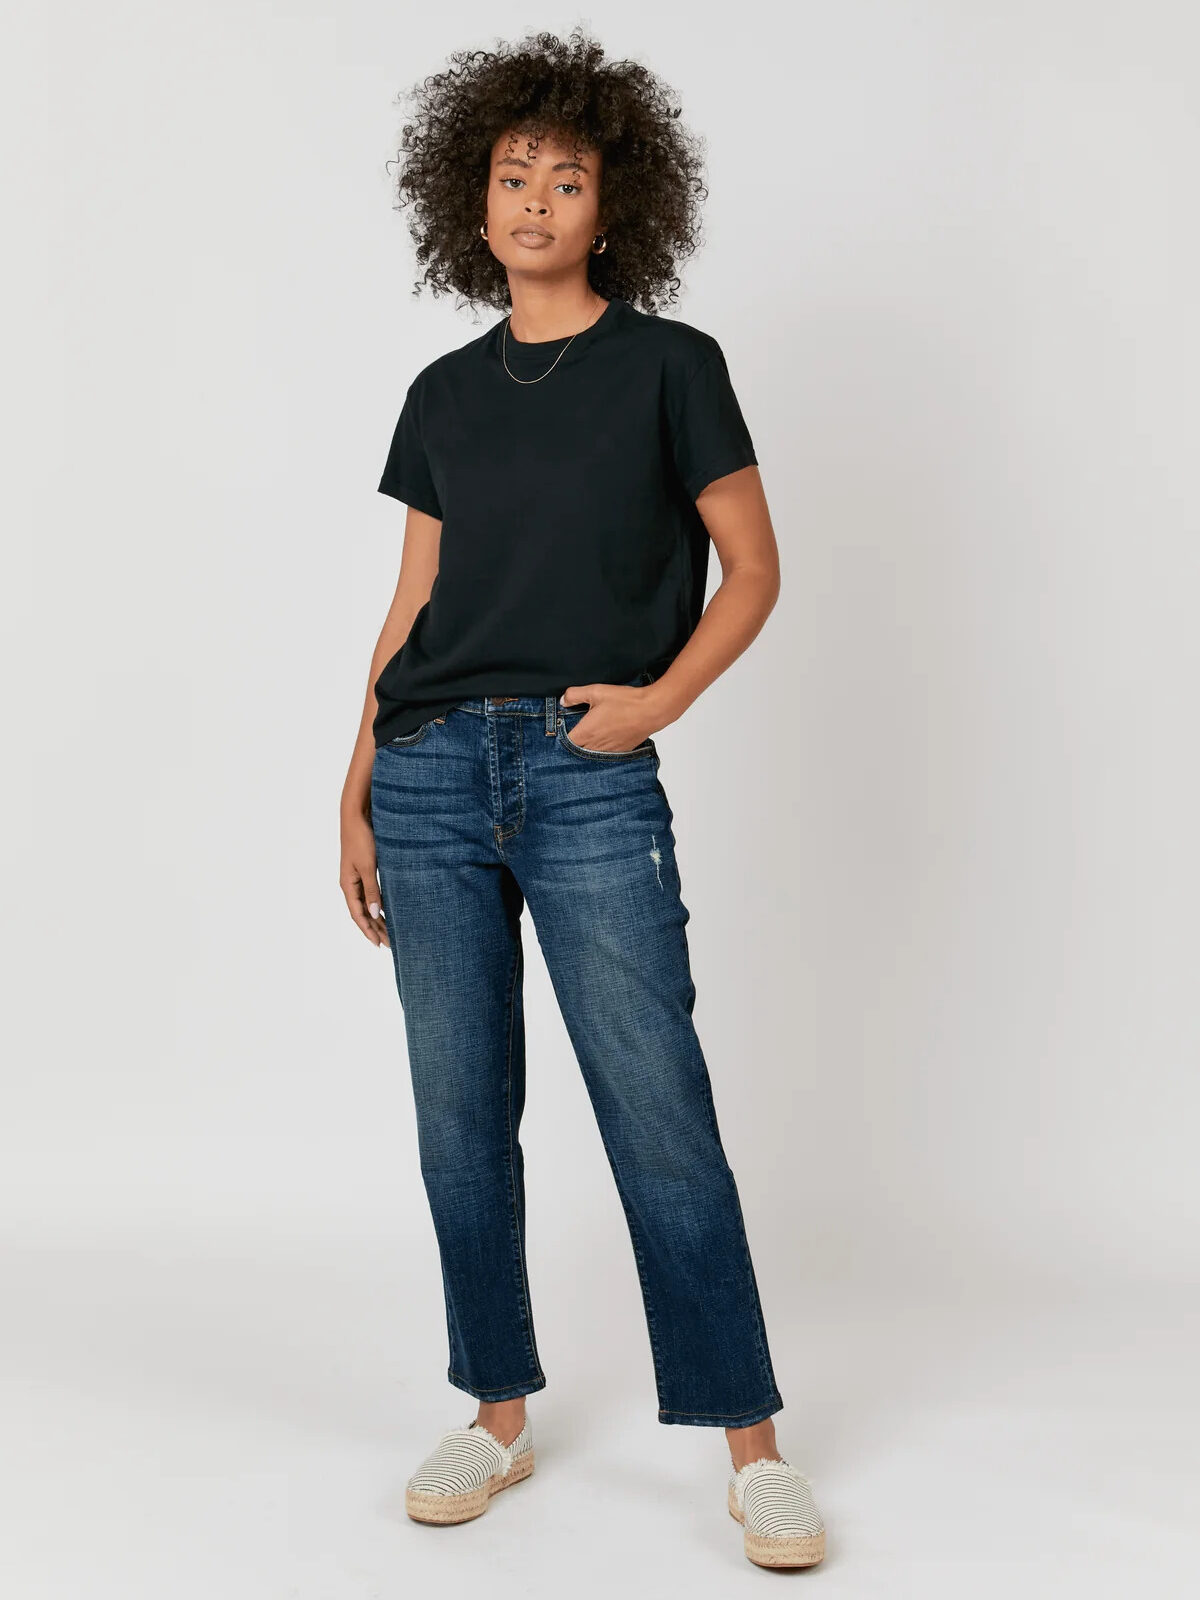 A model wearing sustainable Oliver Logan jeans.